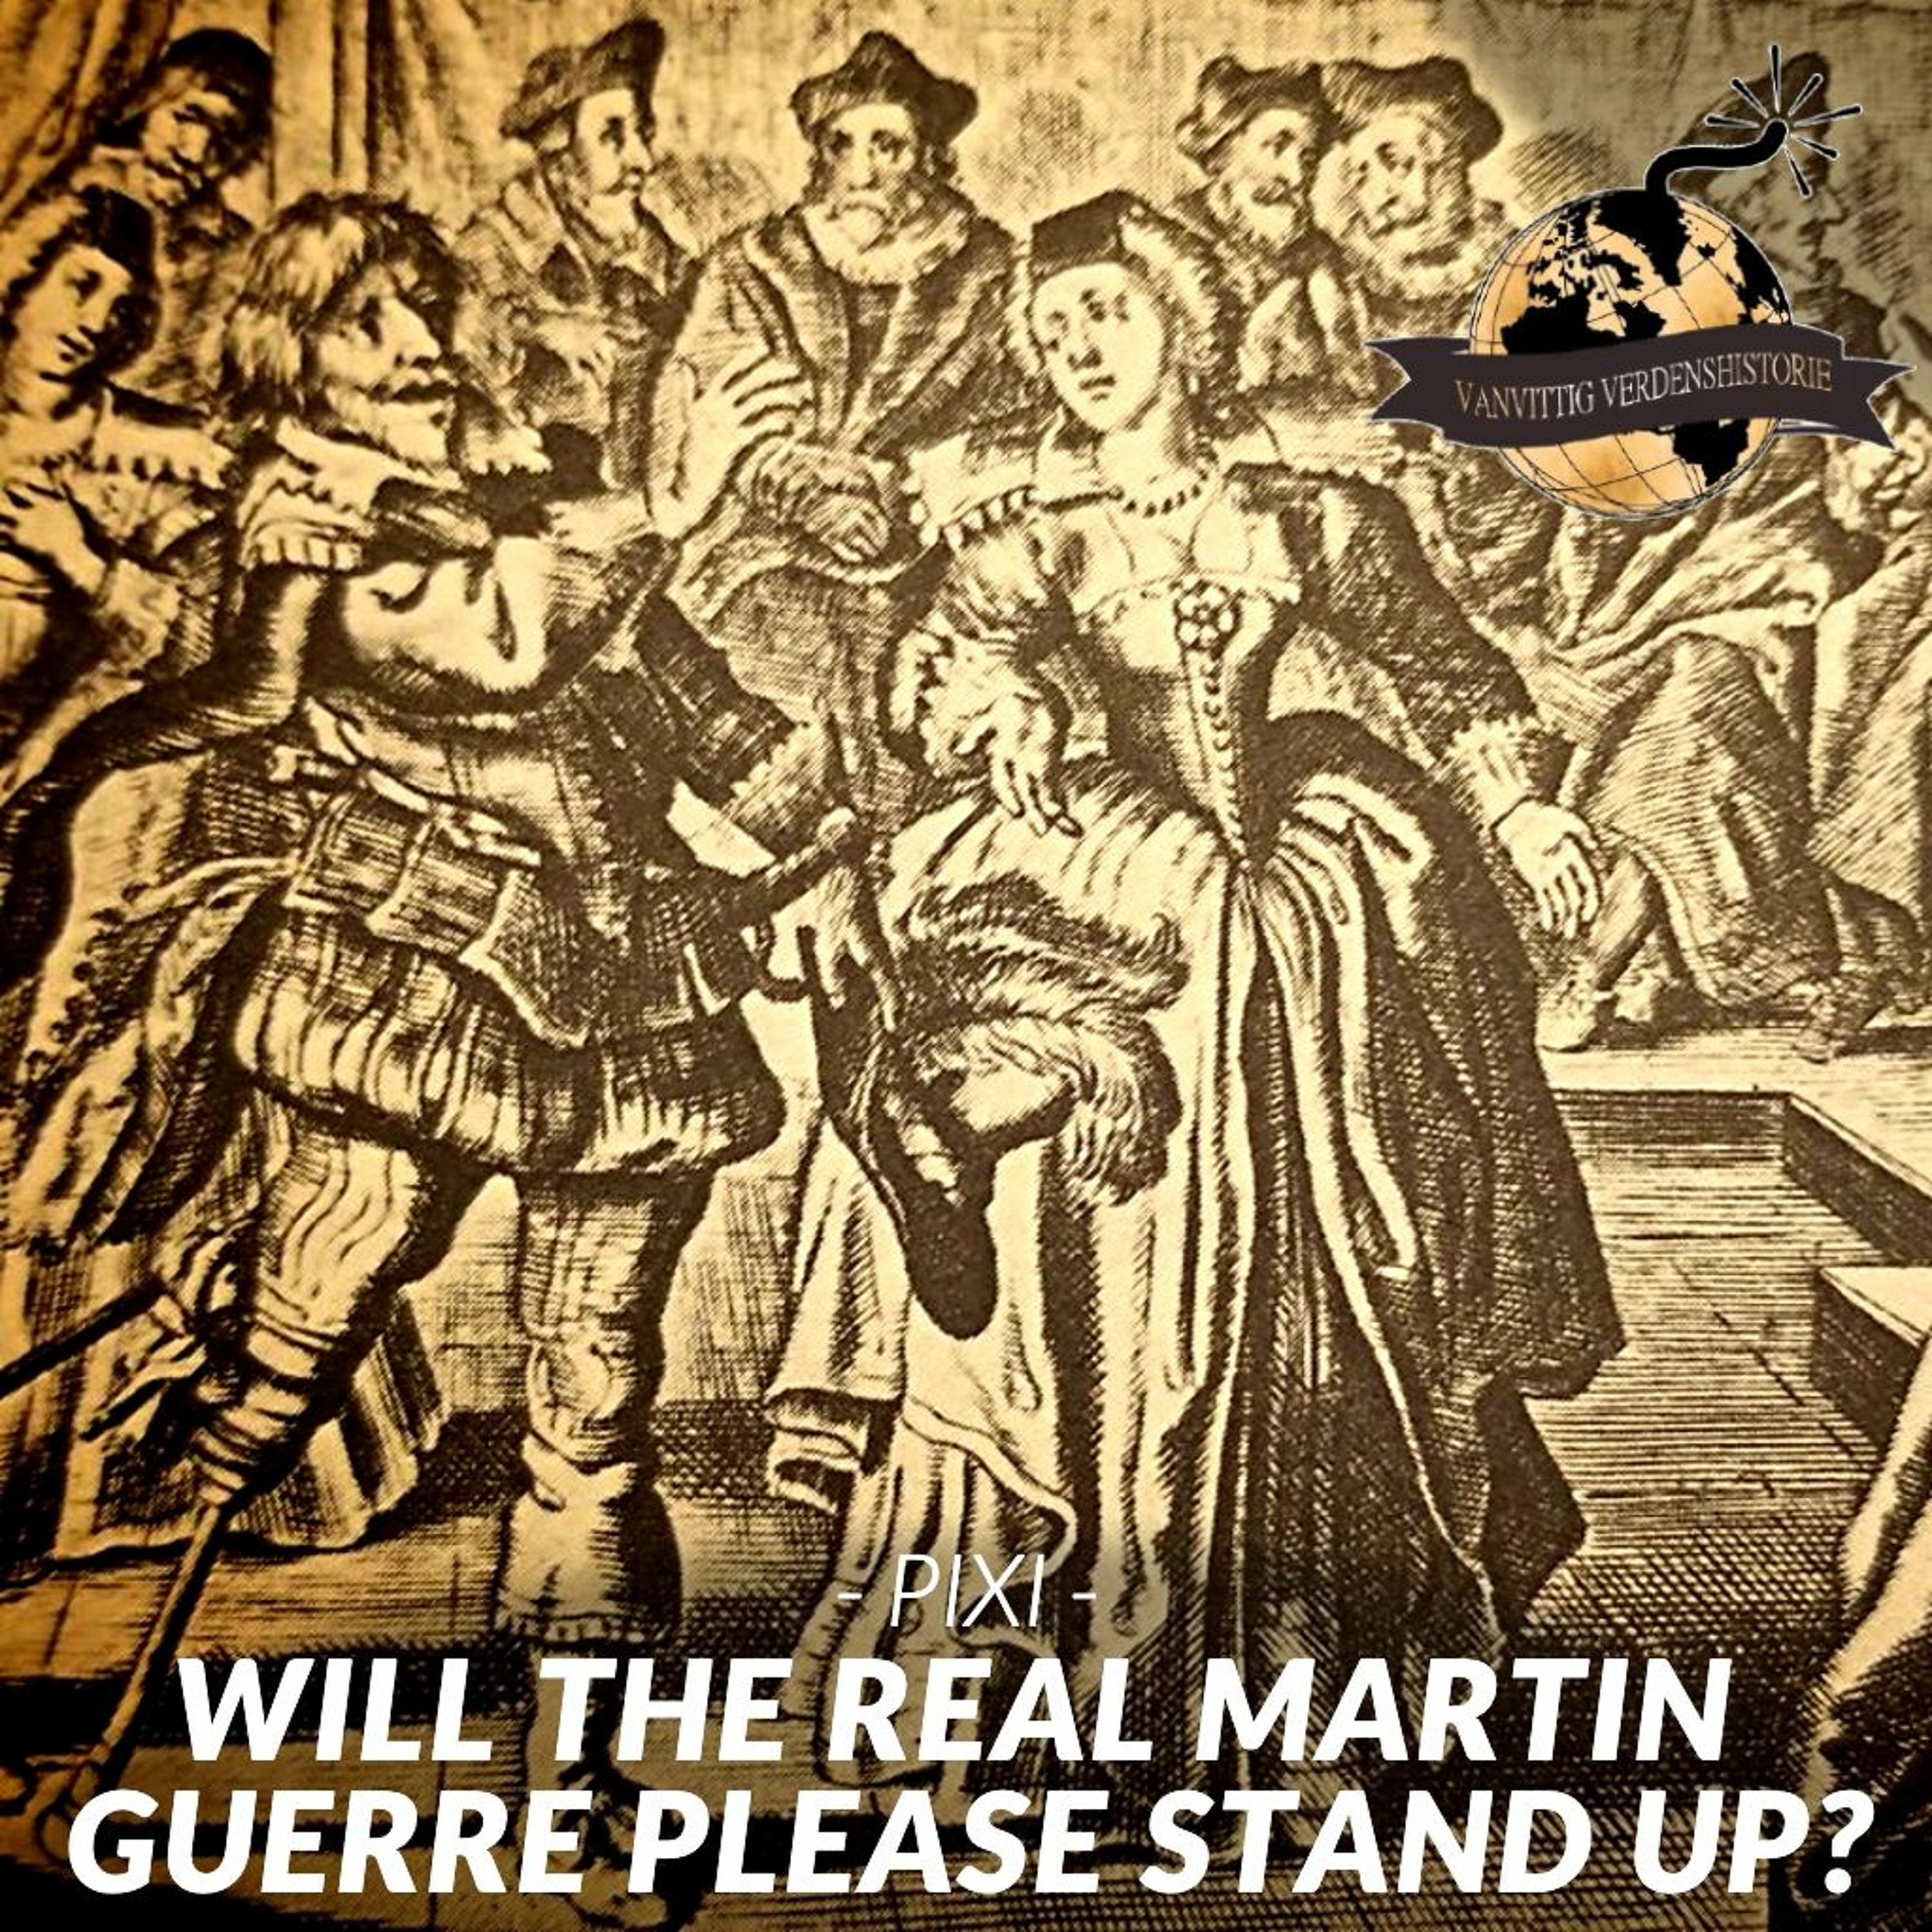 PIXI: Will the real Martin Guerre please stand up?